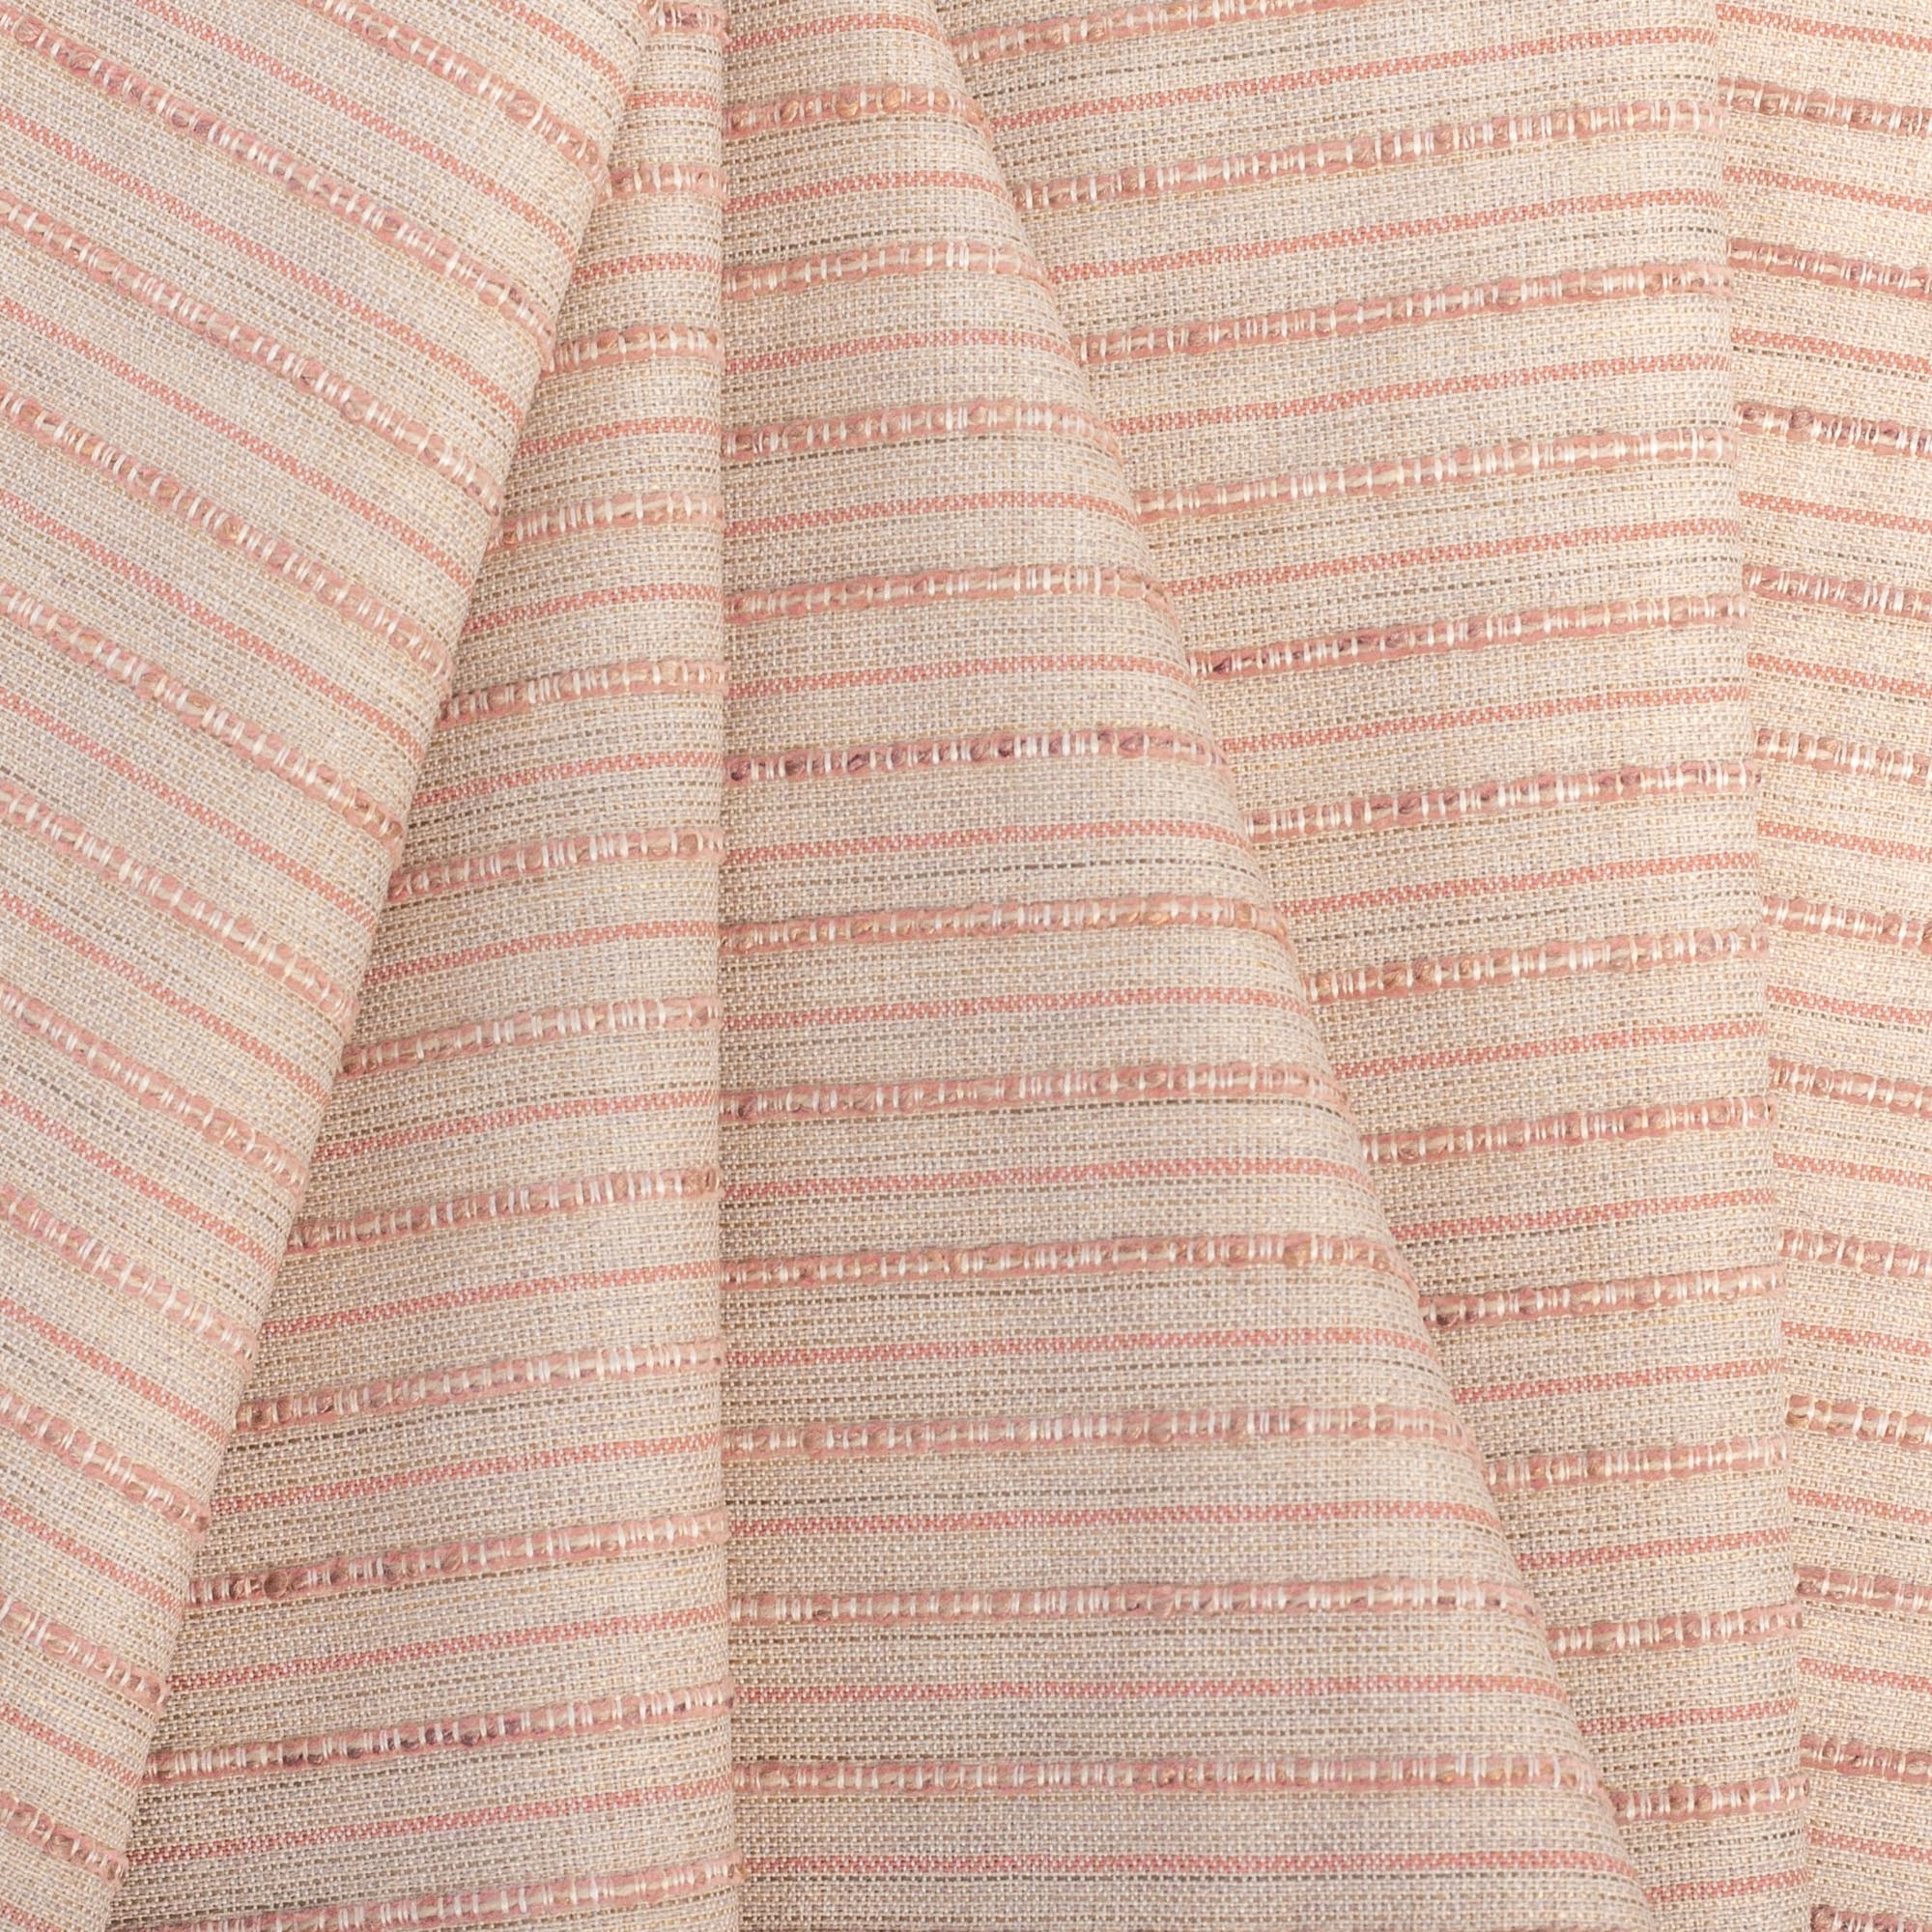 Misto Coral Blush, a light pink and light tan horizontal striped Crypton Home performance fabric from Tonic Living